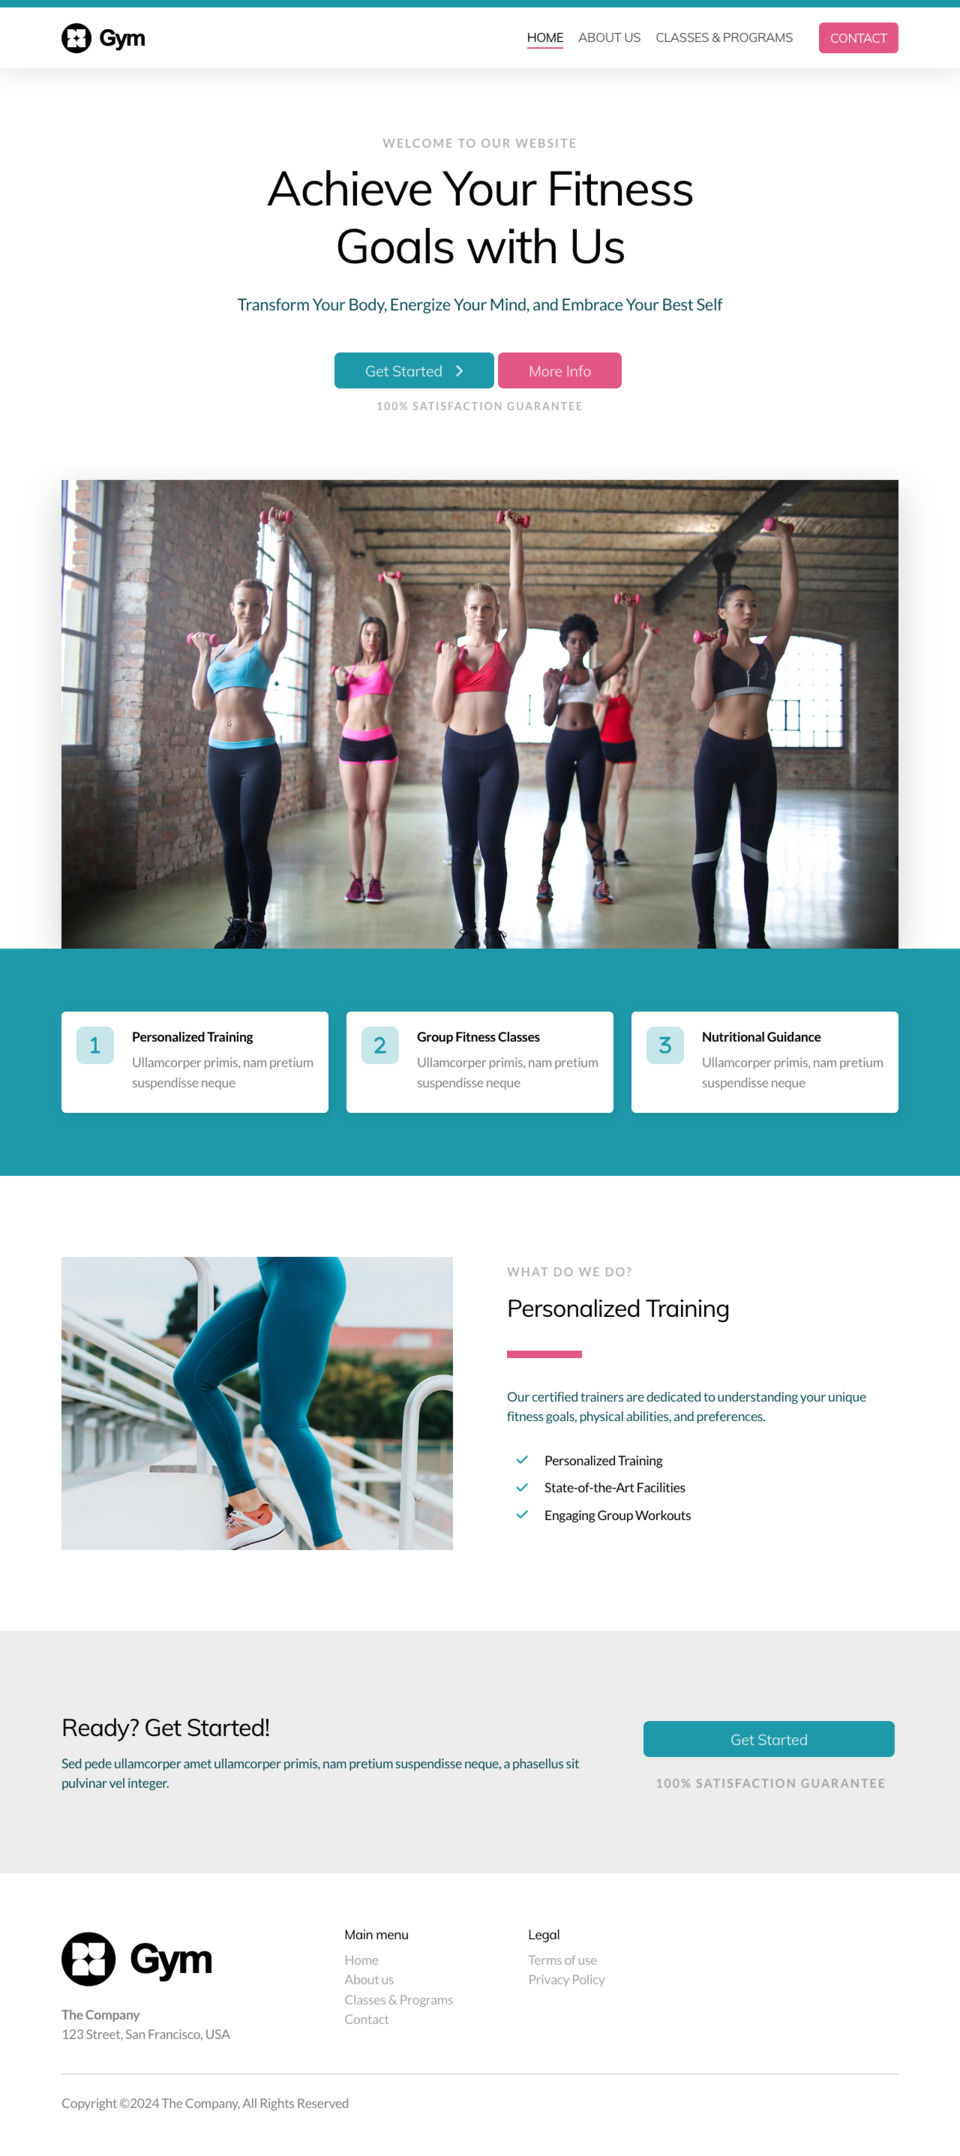 Gym Website Template - Ideal for gyms, personal trainers, health clubs, and fitness professionals looking to create a professional online presence.